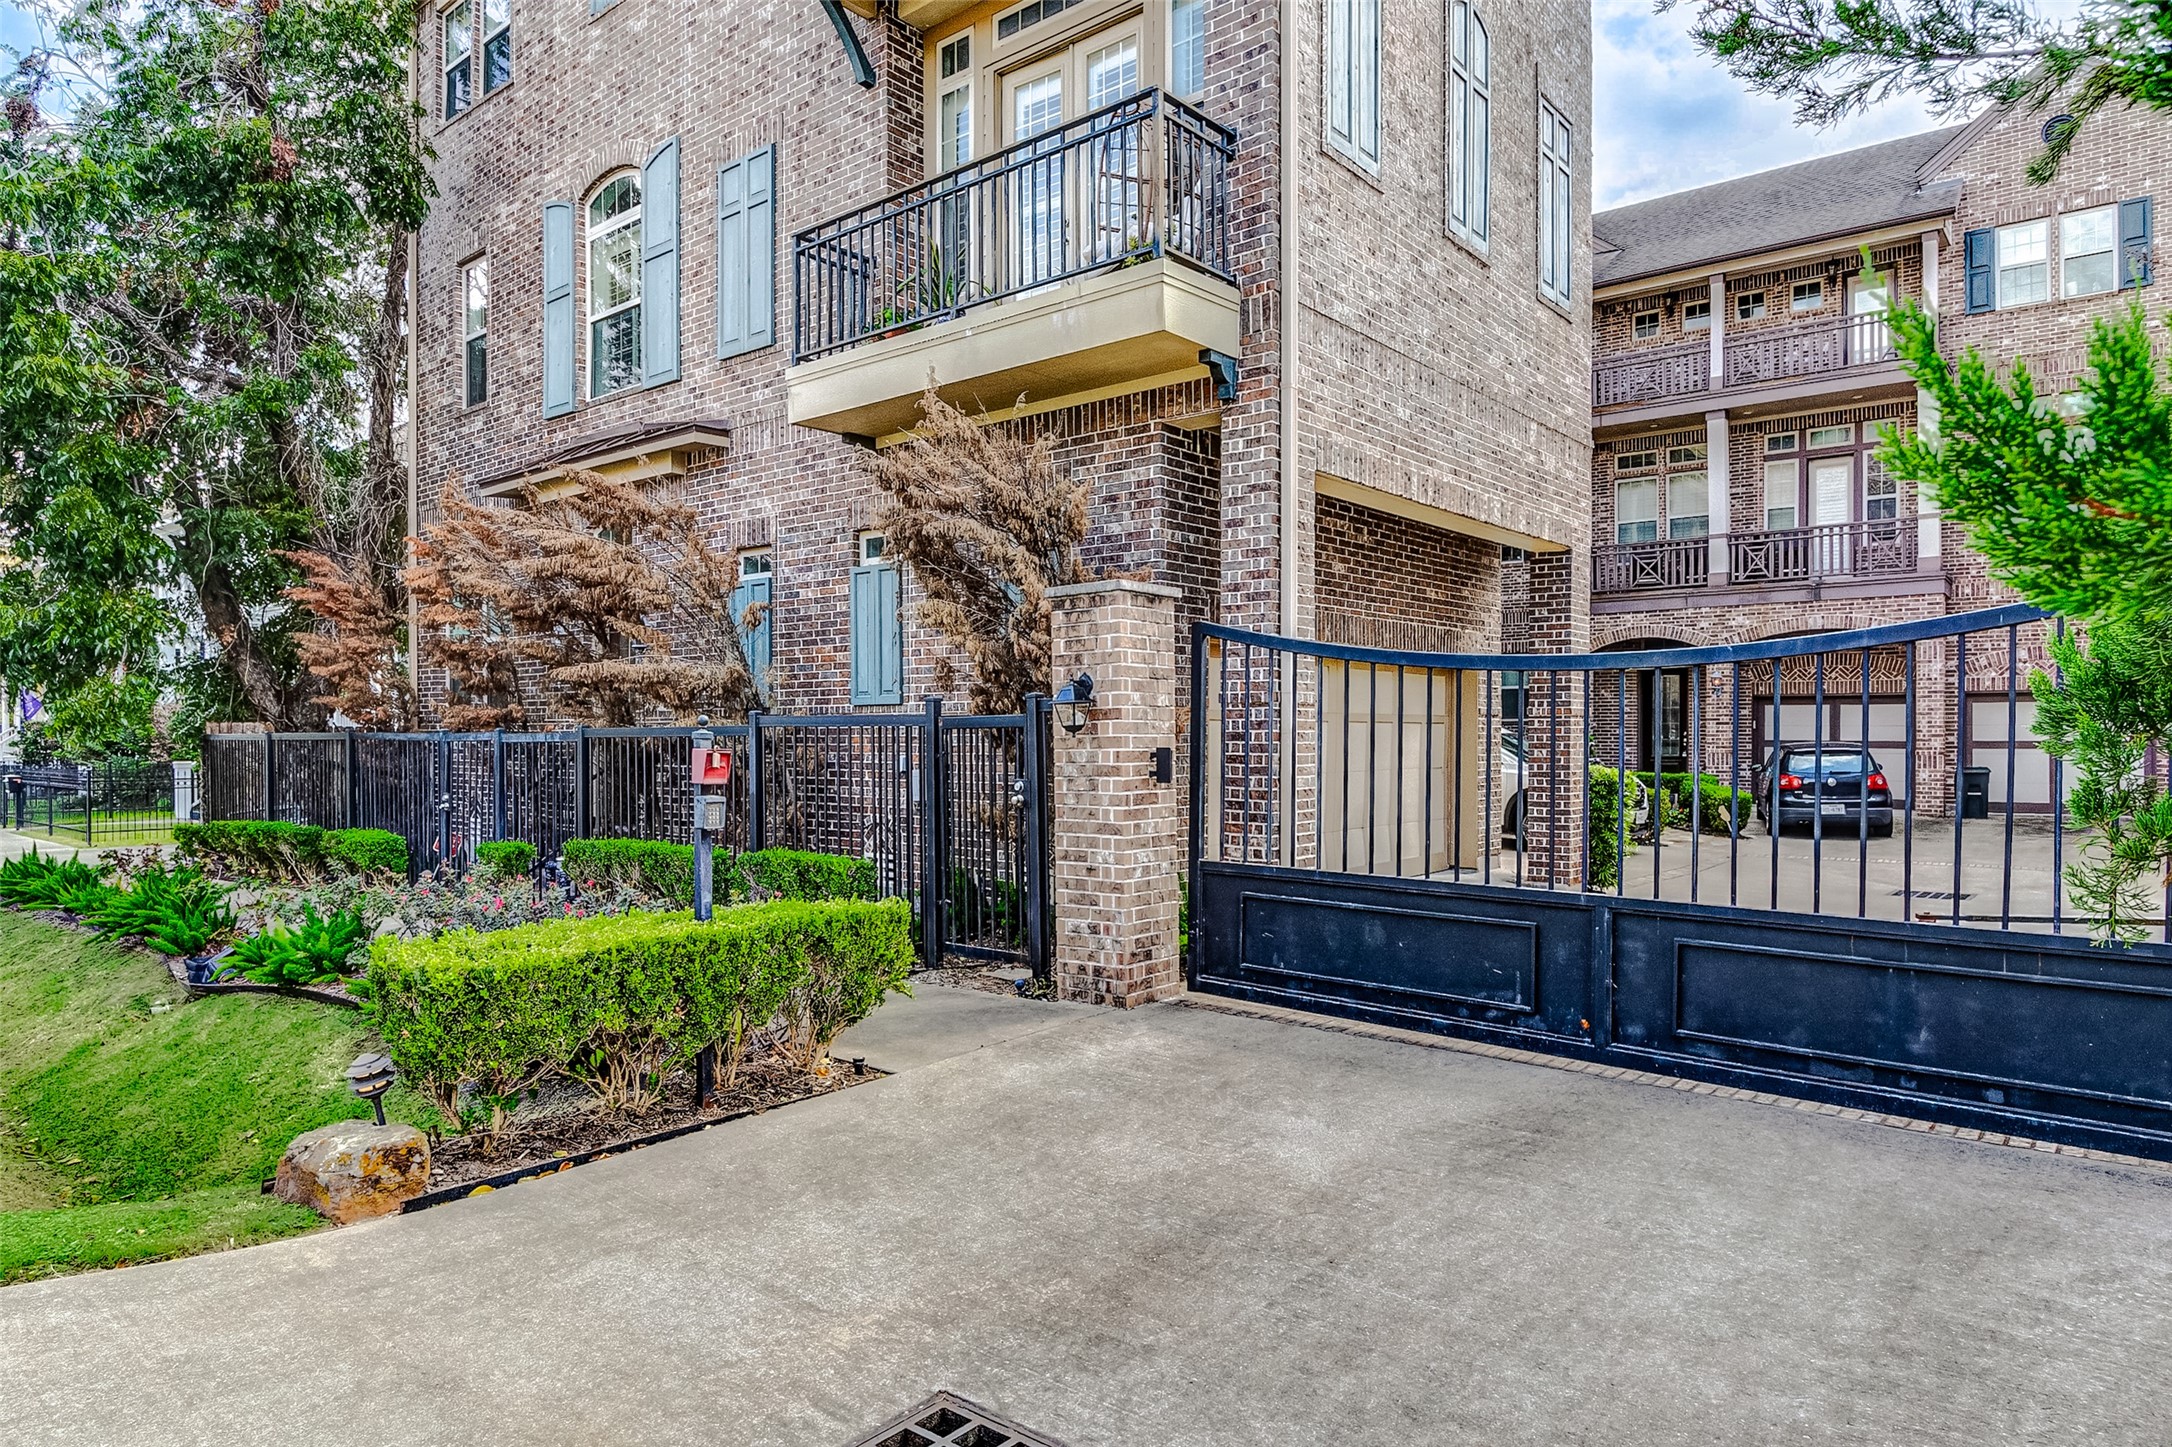 Curb appeal is A+ with beautiful brick exterior, second floor balcony, double-pane windows, and professional landscaping.